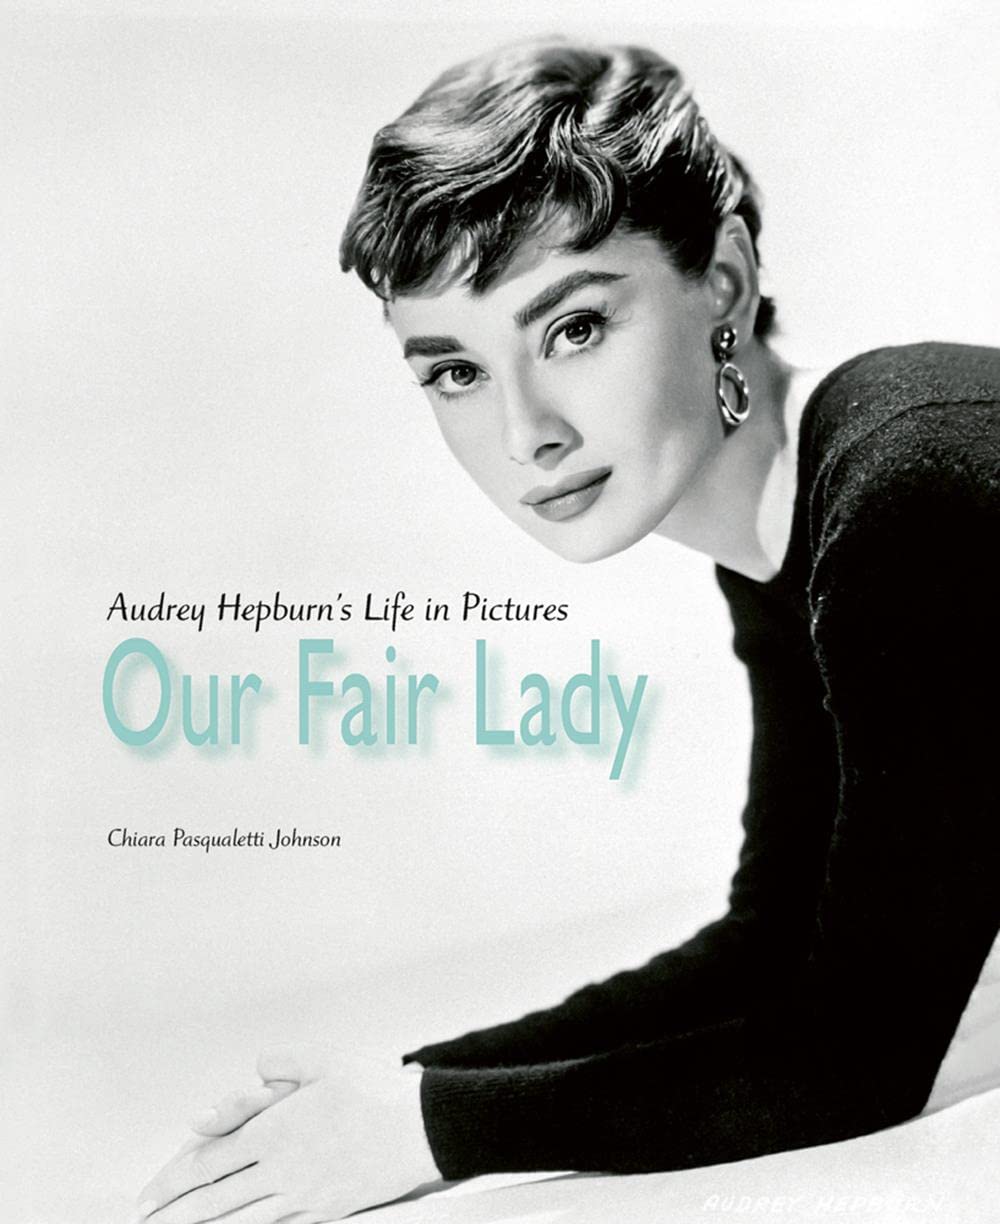 Our Fair Lady - Audrey Hepburn’s Life in Pictures